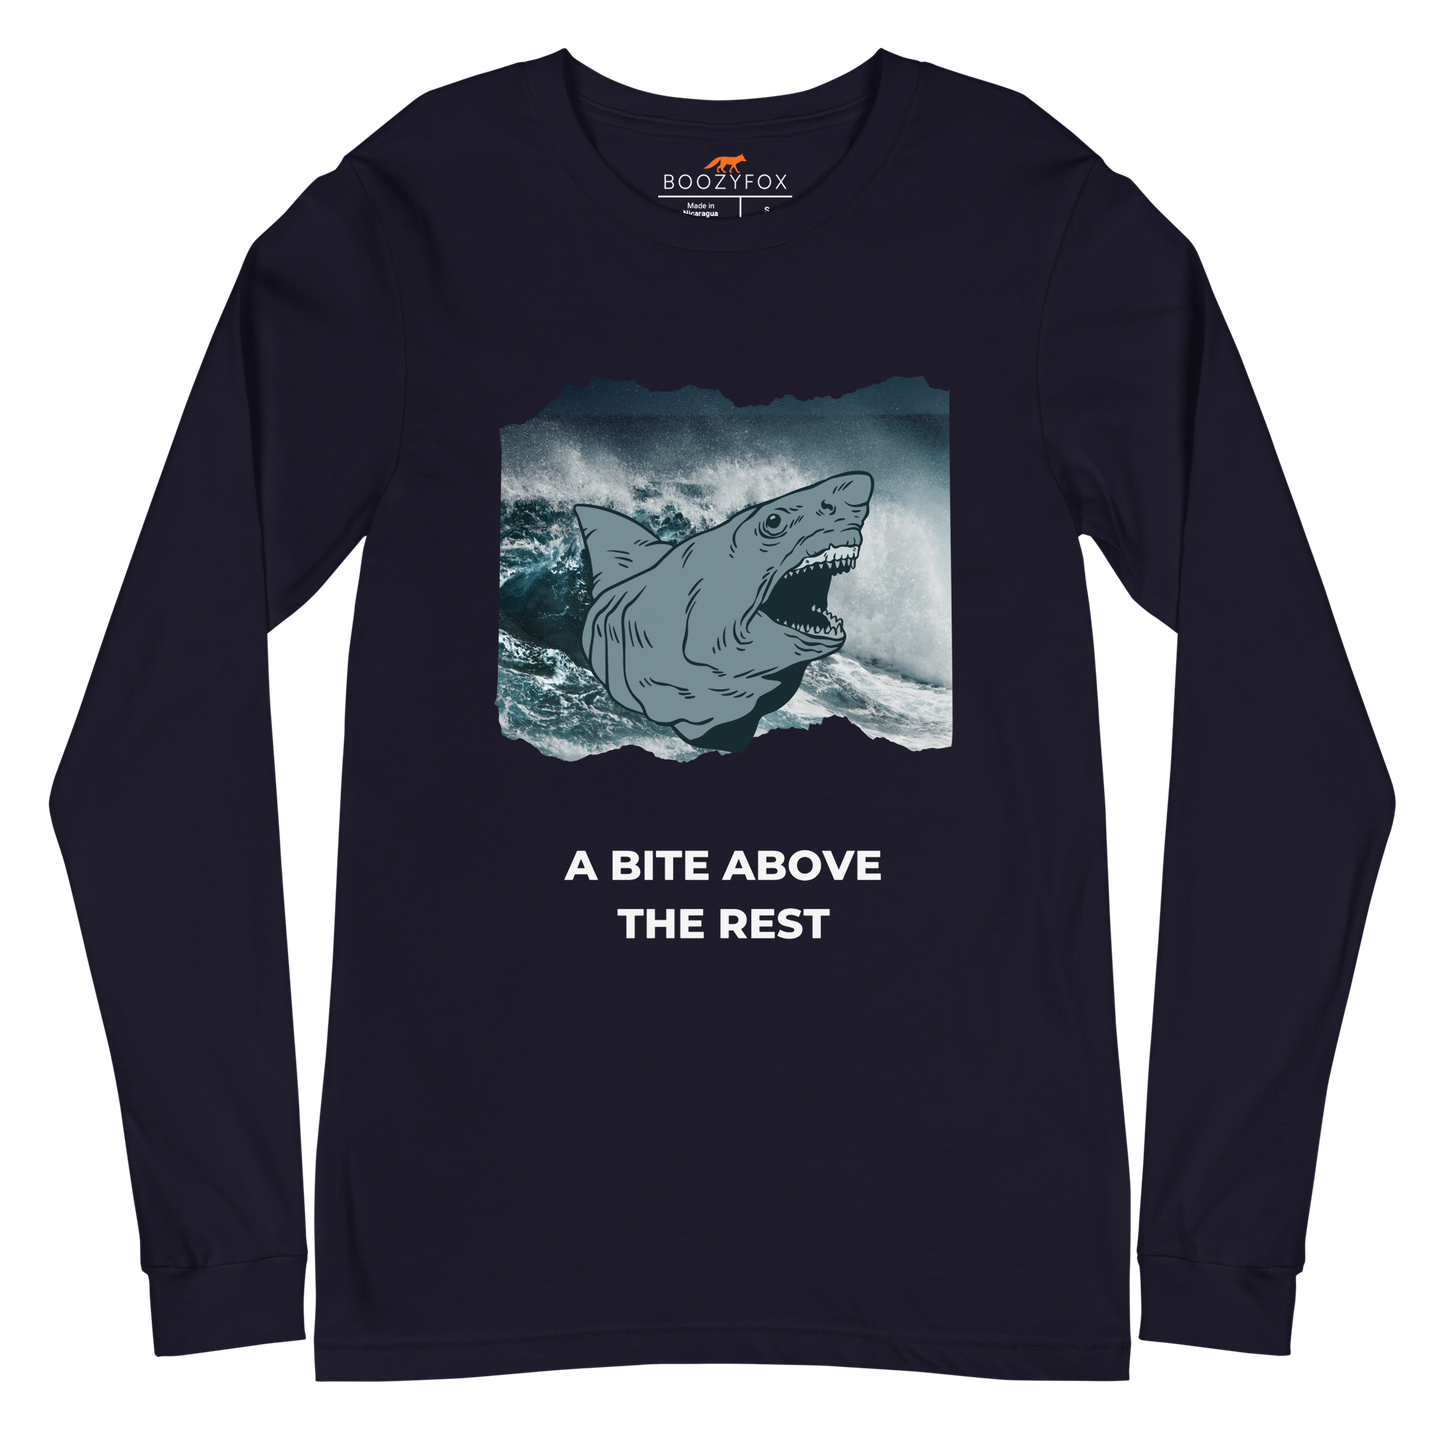 Navy Megalodon Long Sleeve Tee featuring A Bite Above the Rest graphic on the chest - Funny Megalodon Long Sleeve Graphic Tees - Boozy Fox